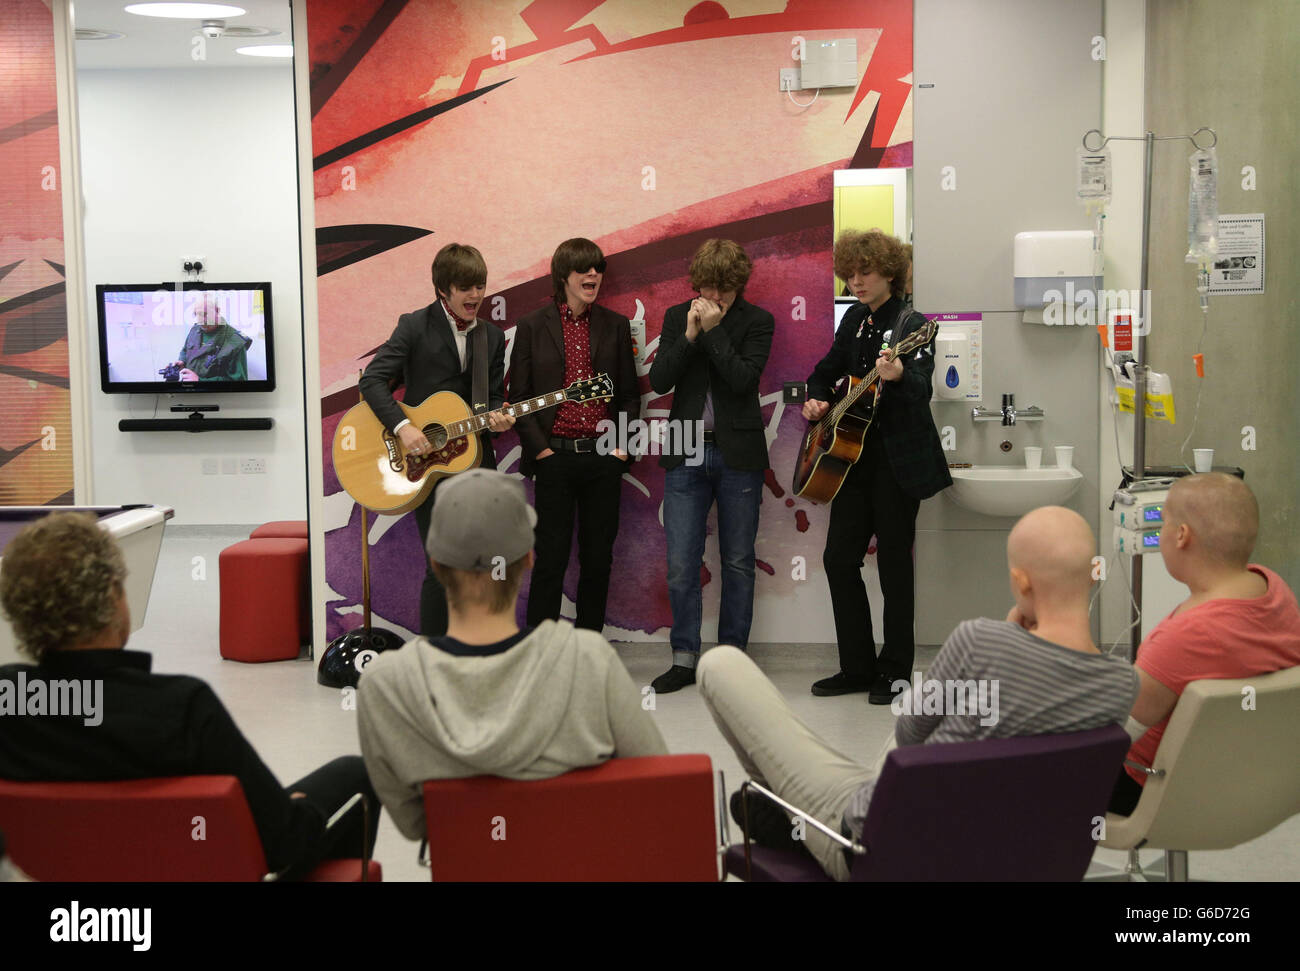 Roger Daltrey CBE (left), Patron of Teenage Cancer Trust, and current patients watching as R'n'B band The Strypes (left to right) Josh McClorey, Ross Farrelly, Pete O'Hanlon and Evan Walsh play during their visit and gig at a specialist Teenage Cancer Trust unit at University College Macmillan Cancer Centre, central London. Stock Photo